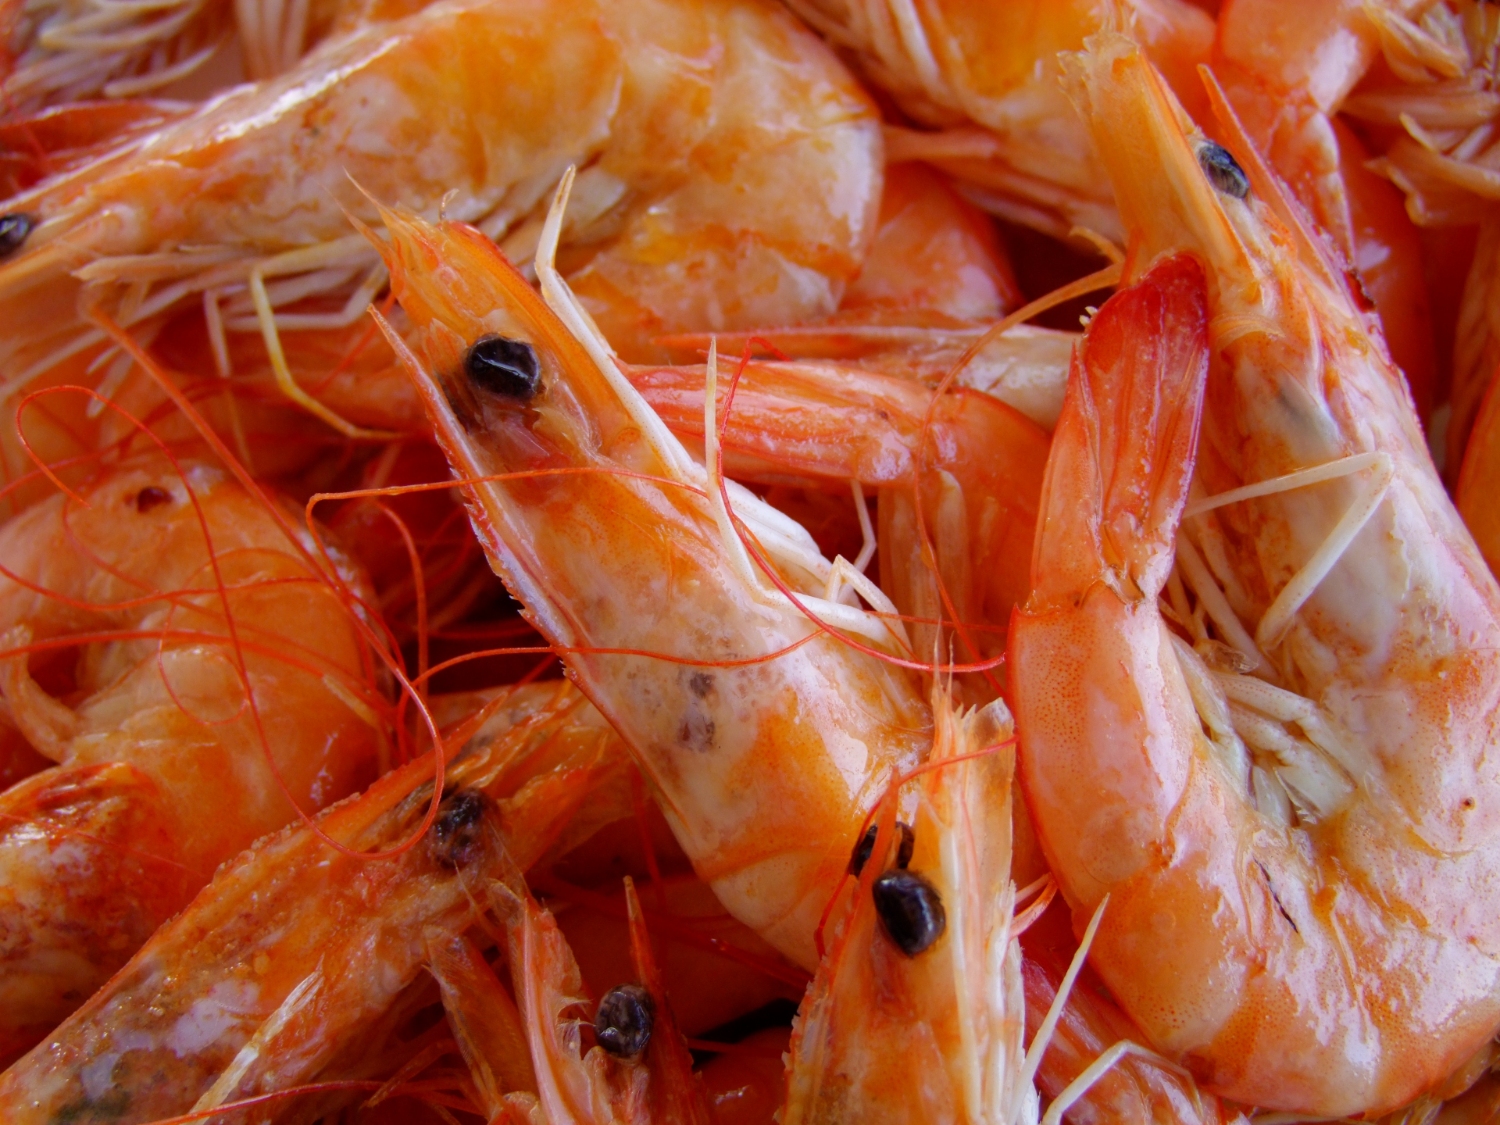 Market report: farmed shrimp stayed stable in Asia, increased production in Latin America